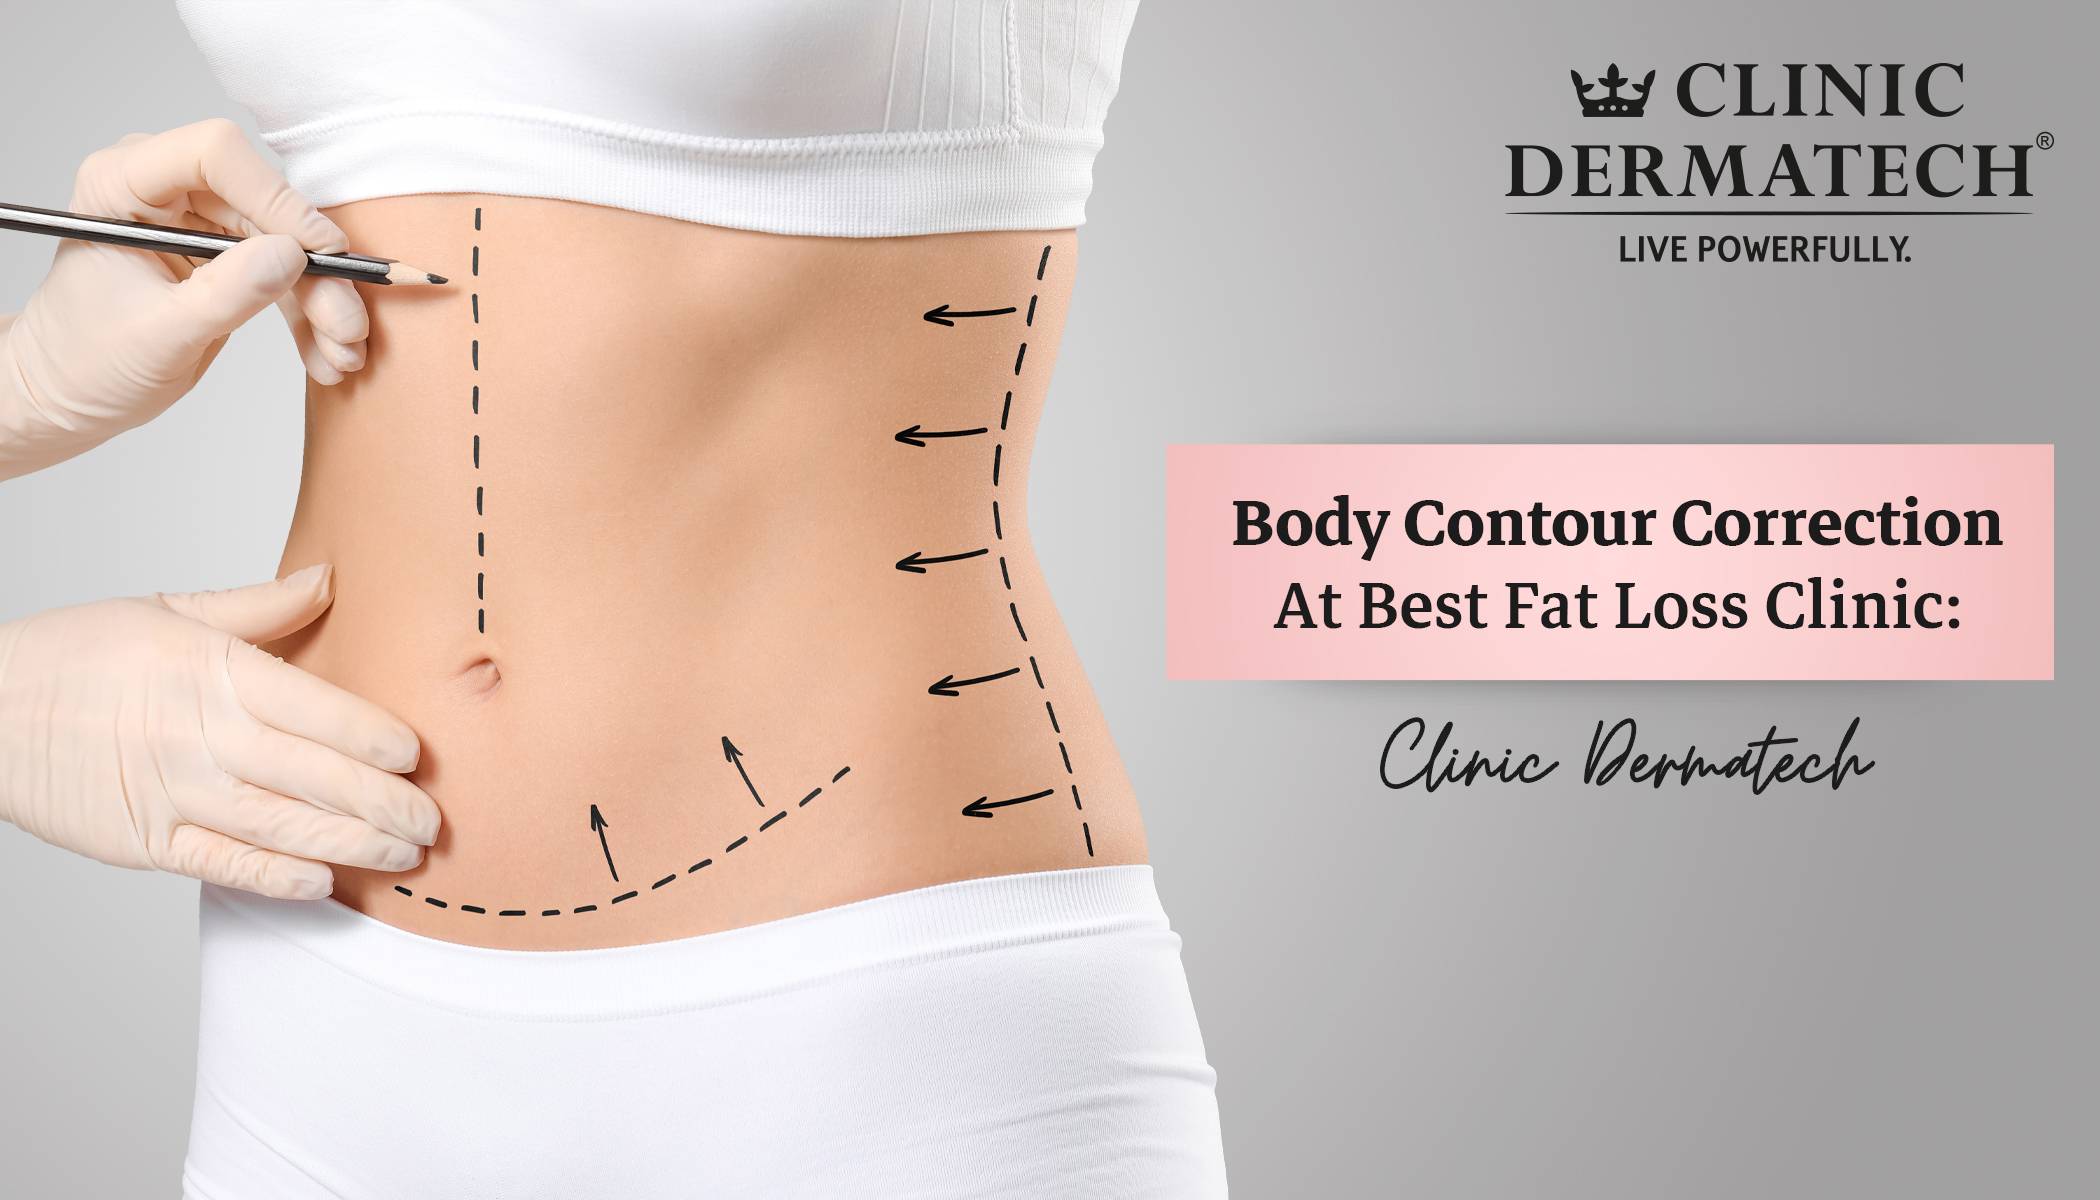 Body Contour Correction At Best Fat Loss Clinic: Clinic Dermatech